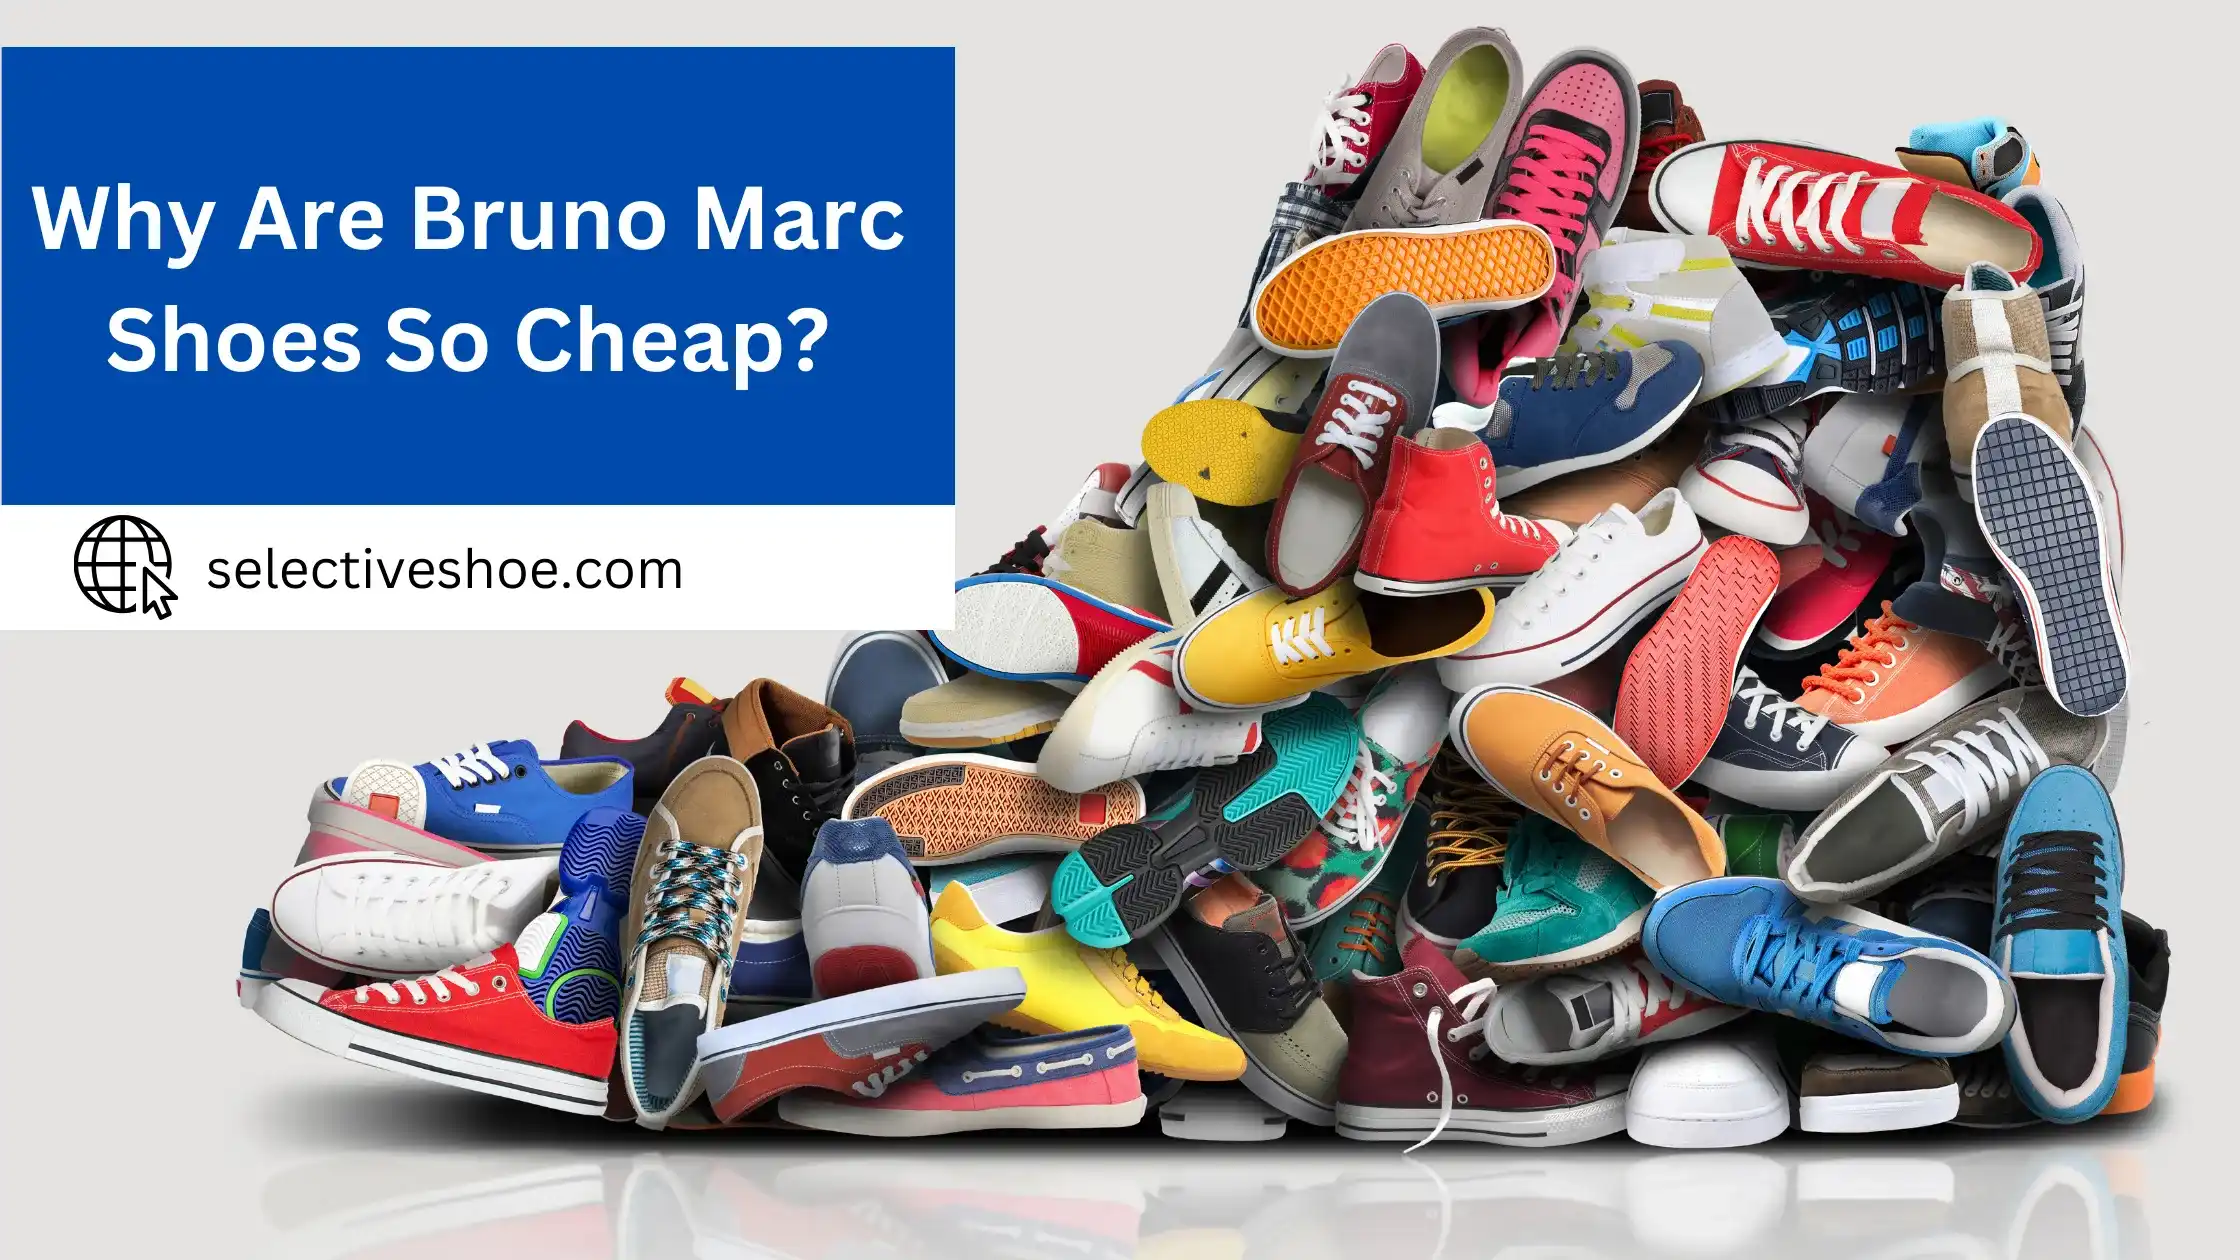 Why Are Bruno Marc Shoes so Cheap? (An In-Depth Guide)